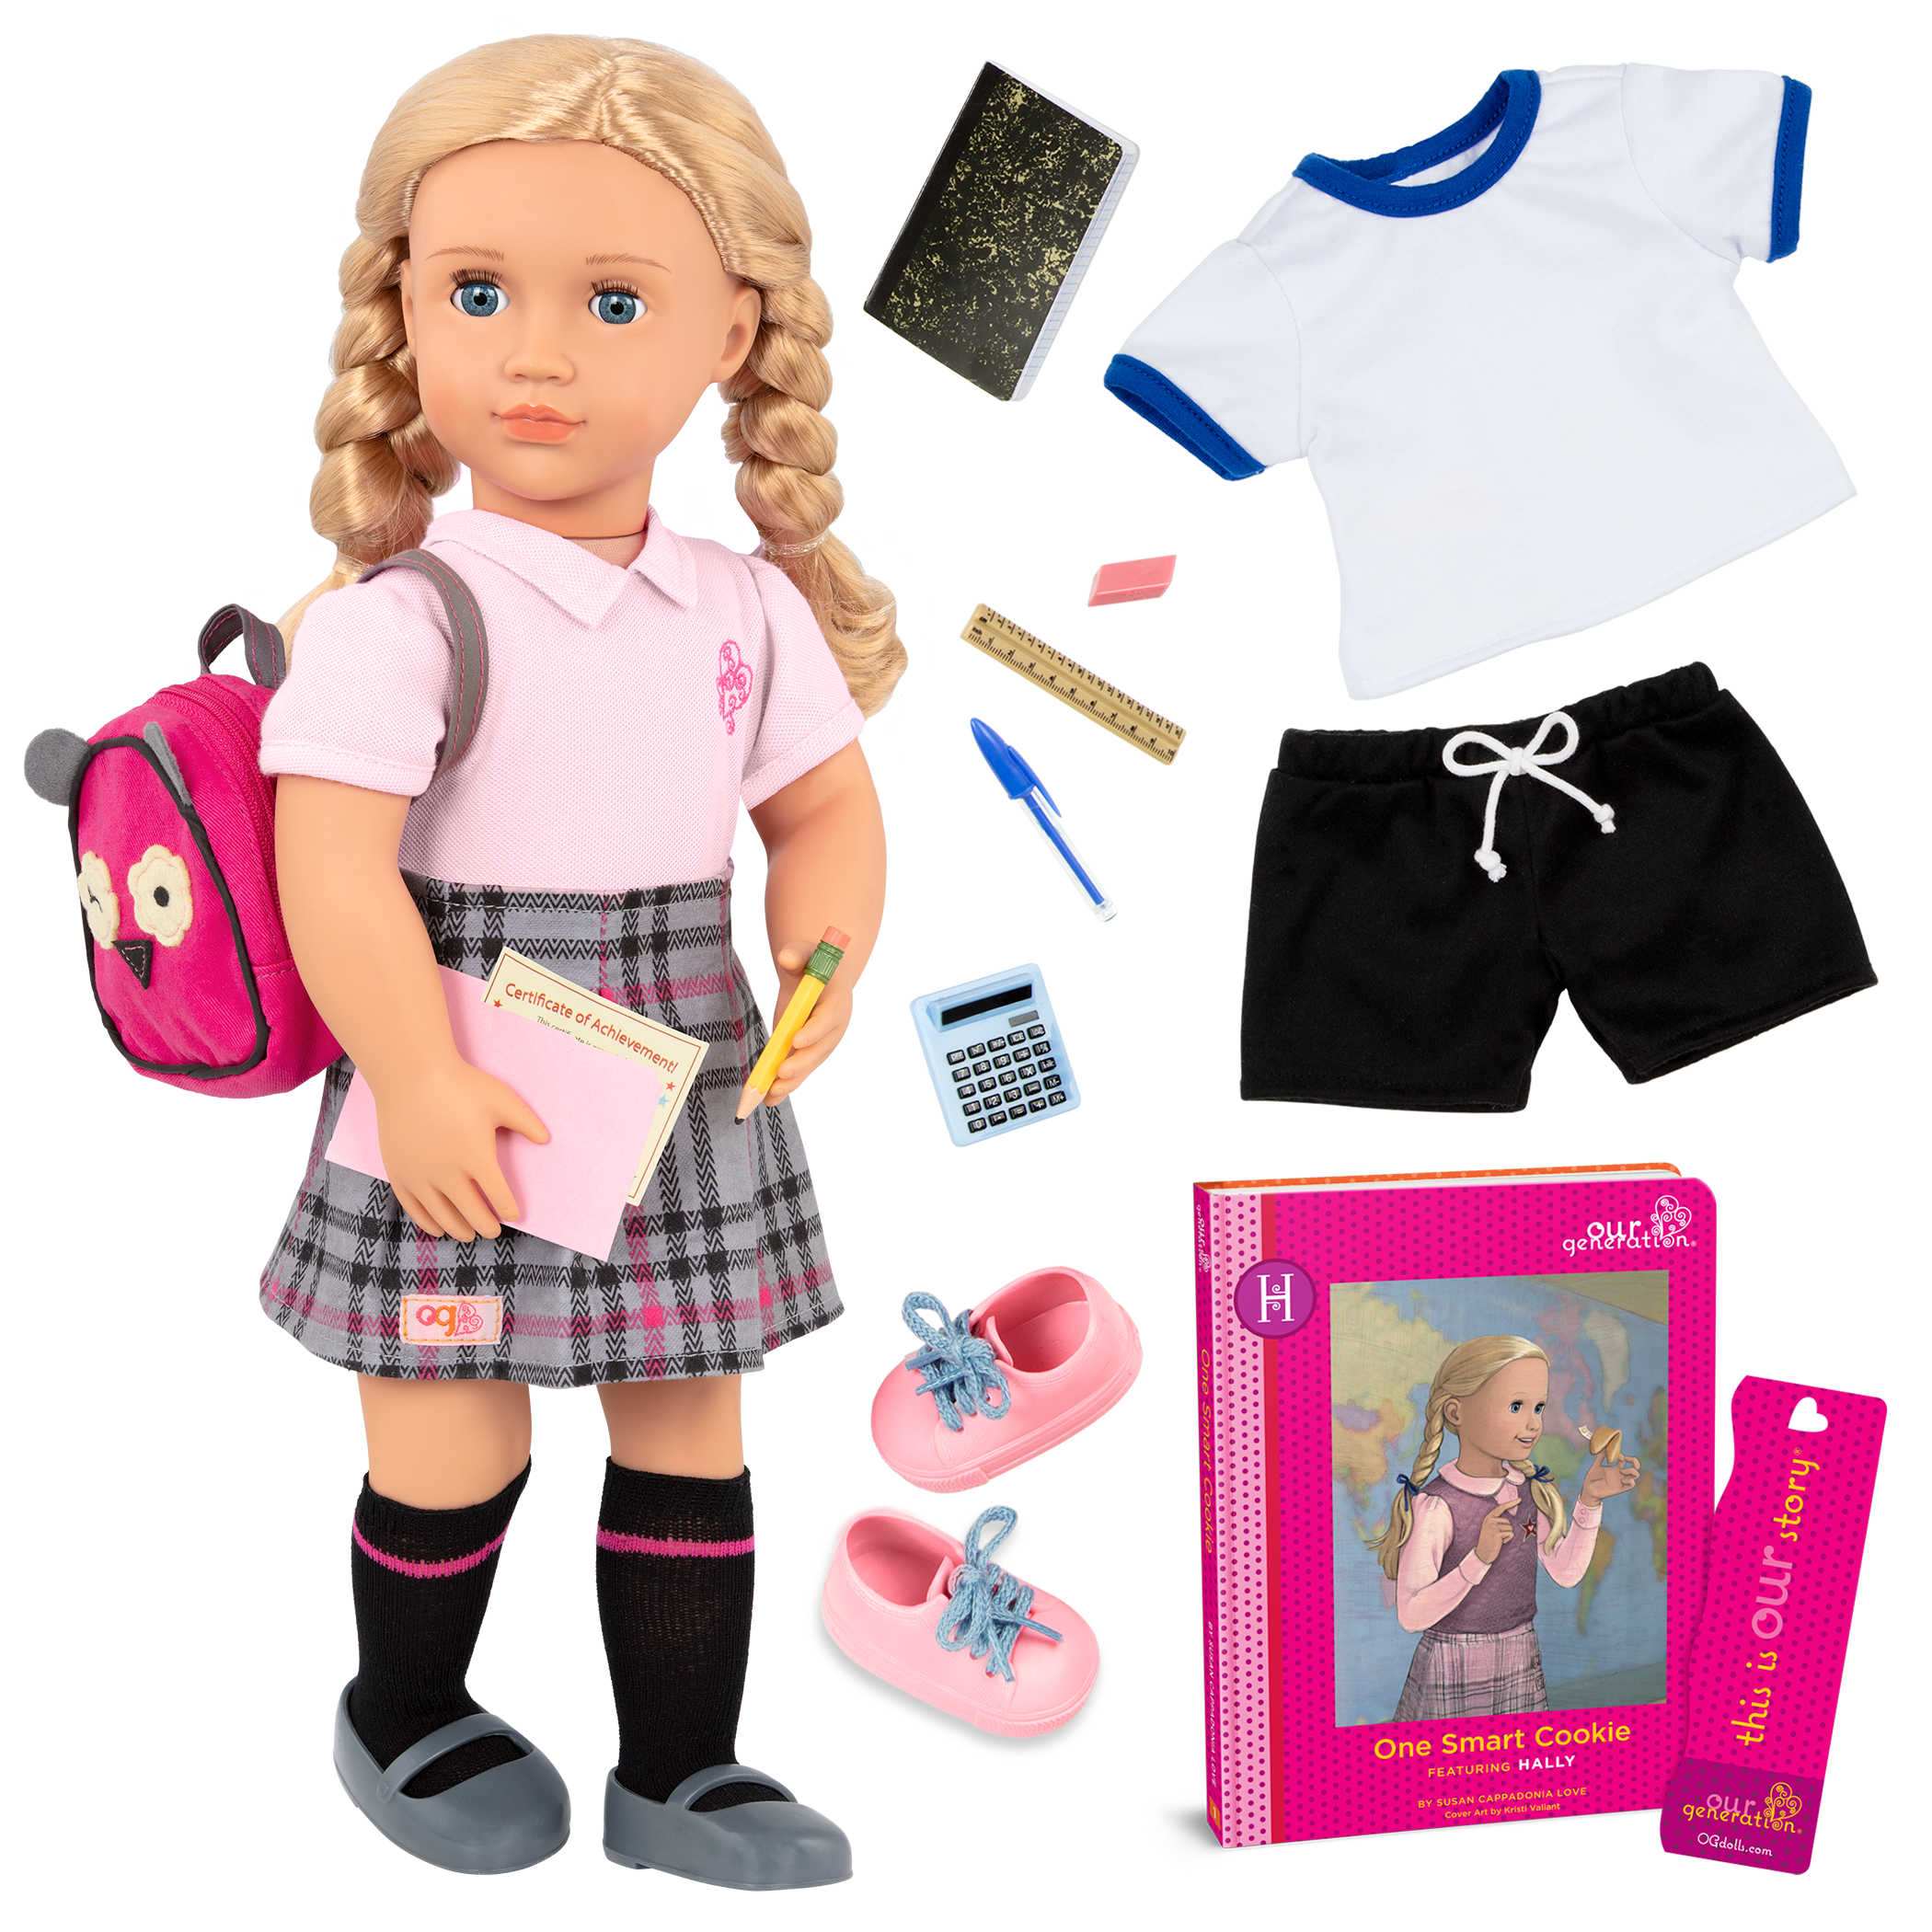 18-inch Deluxe School Doll Hally